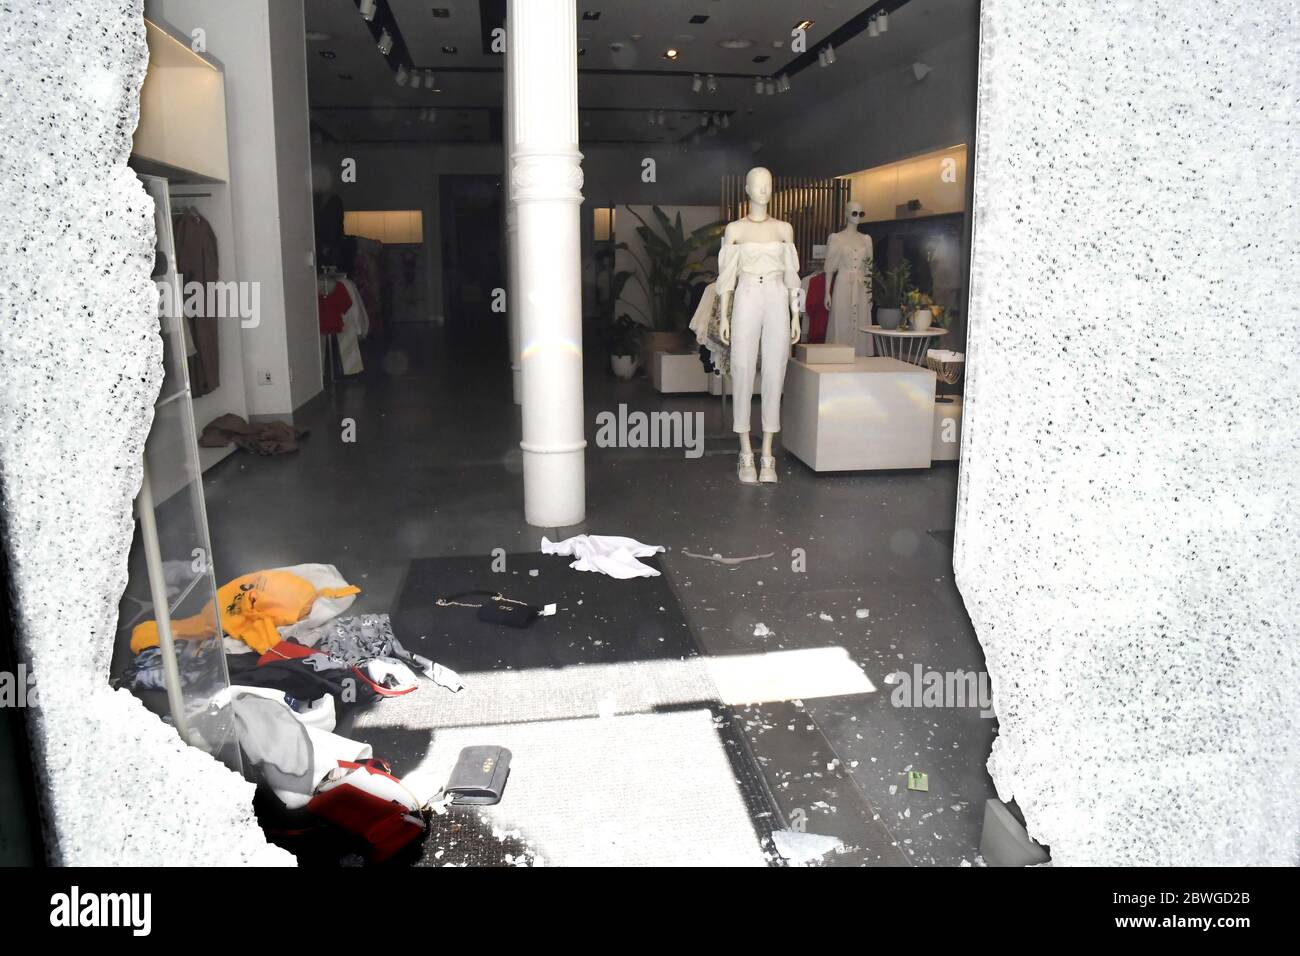 New York, United States. 01st June, 2020. Damage to the H&M clothing store  in the Soho district of Manhattan is seen in this photo on Monday, June 1,  2020 in New York